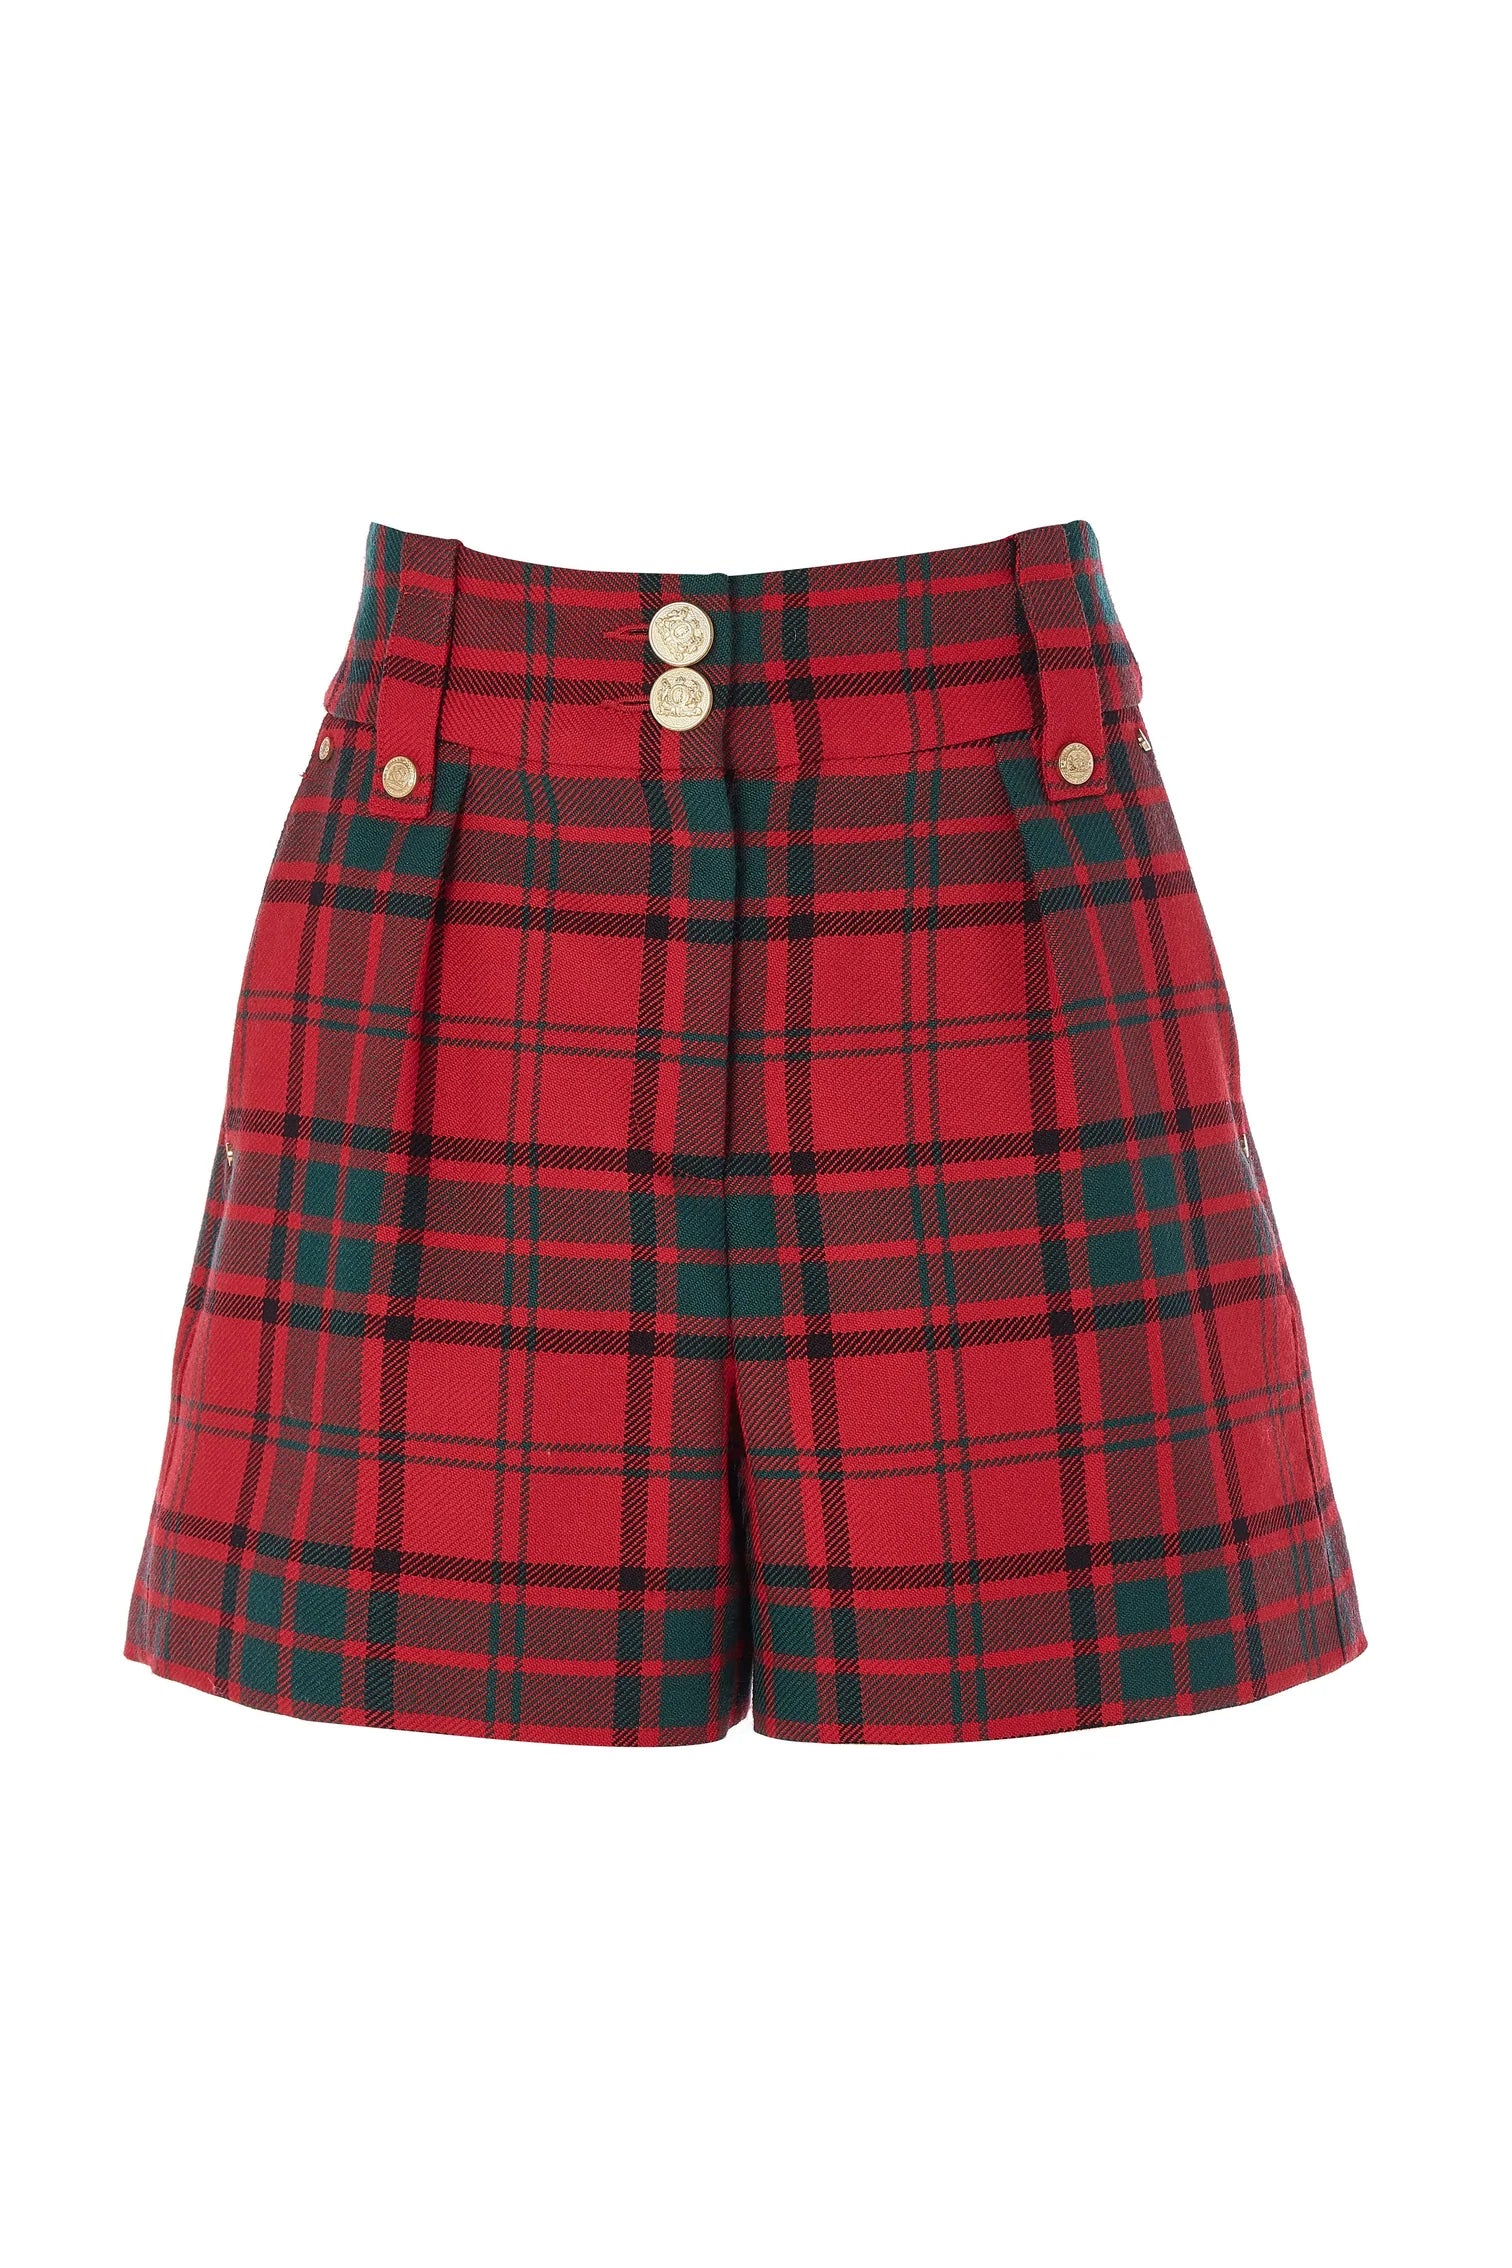 Holland Cooper Luxe Tailored Short in Red Tartan